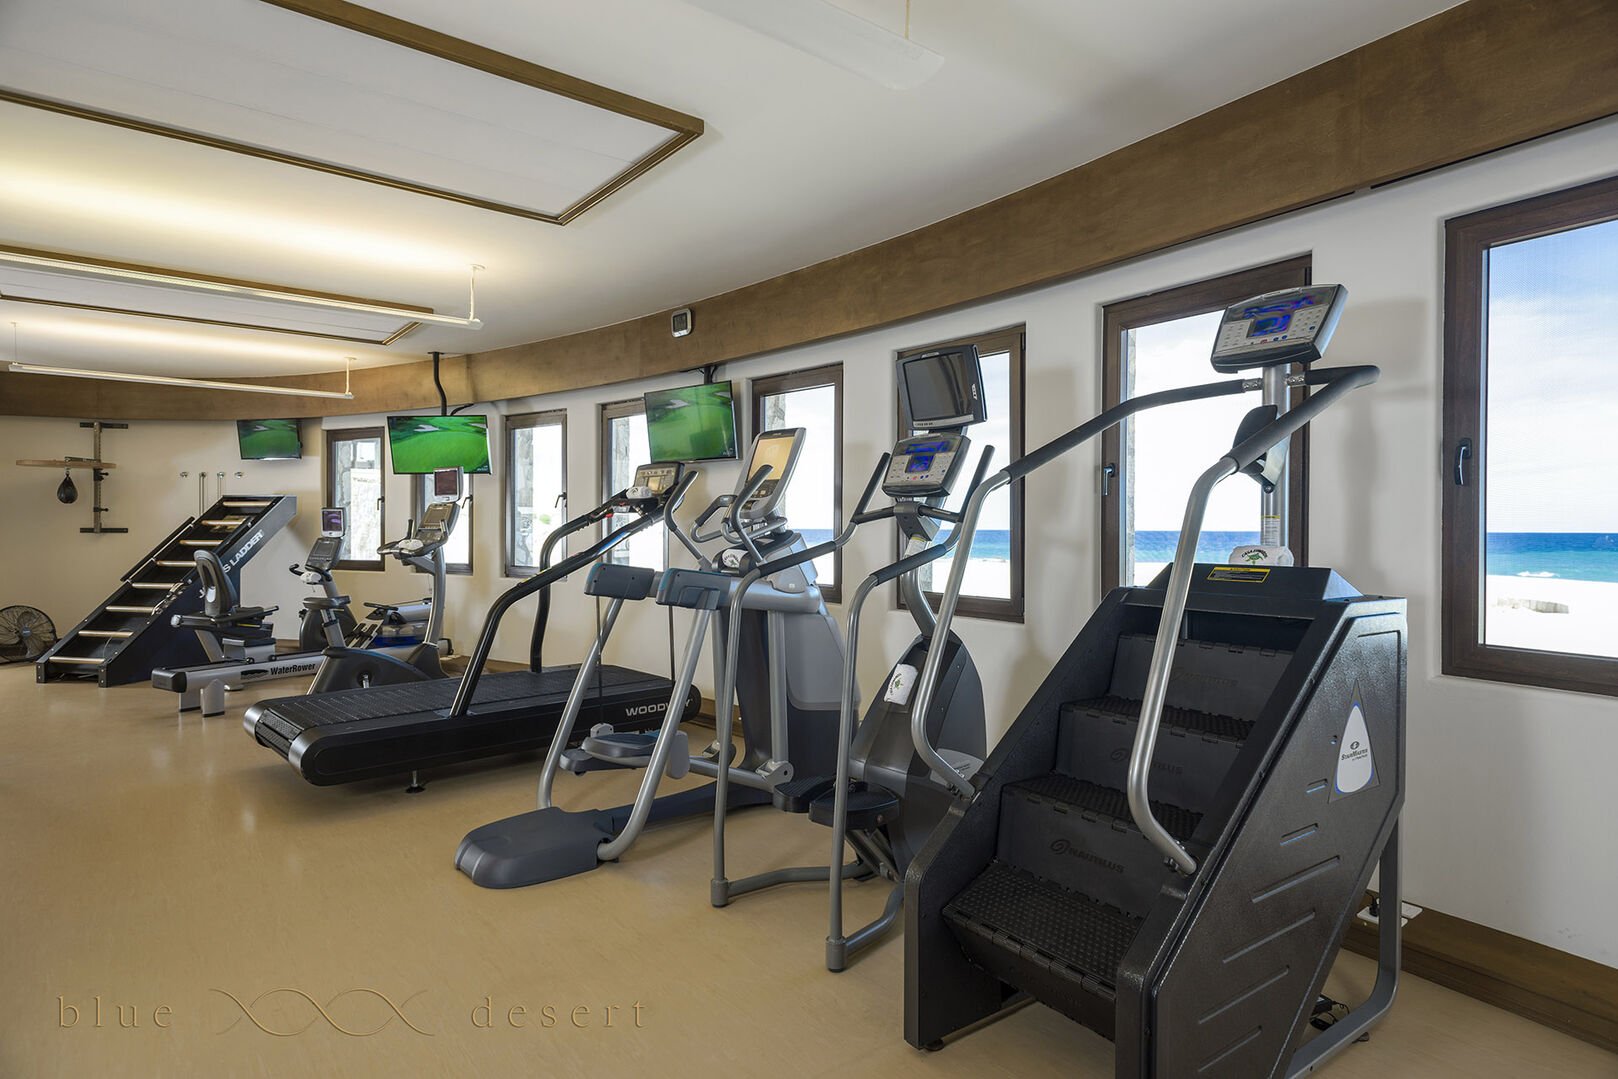 Amazing views from the sea of Cortez while you are working out.